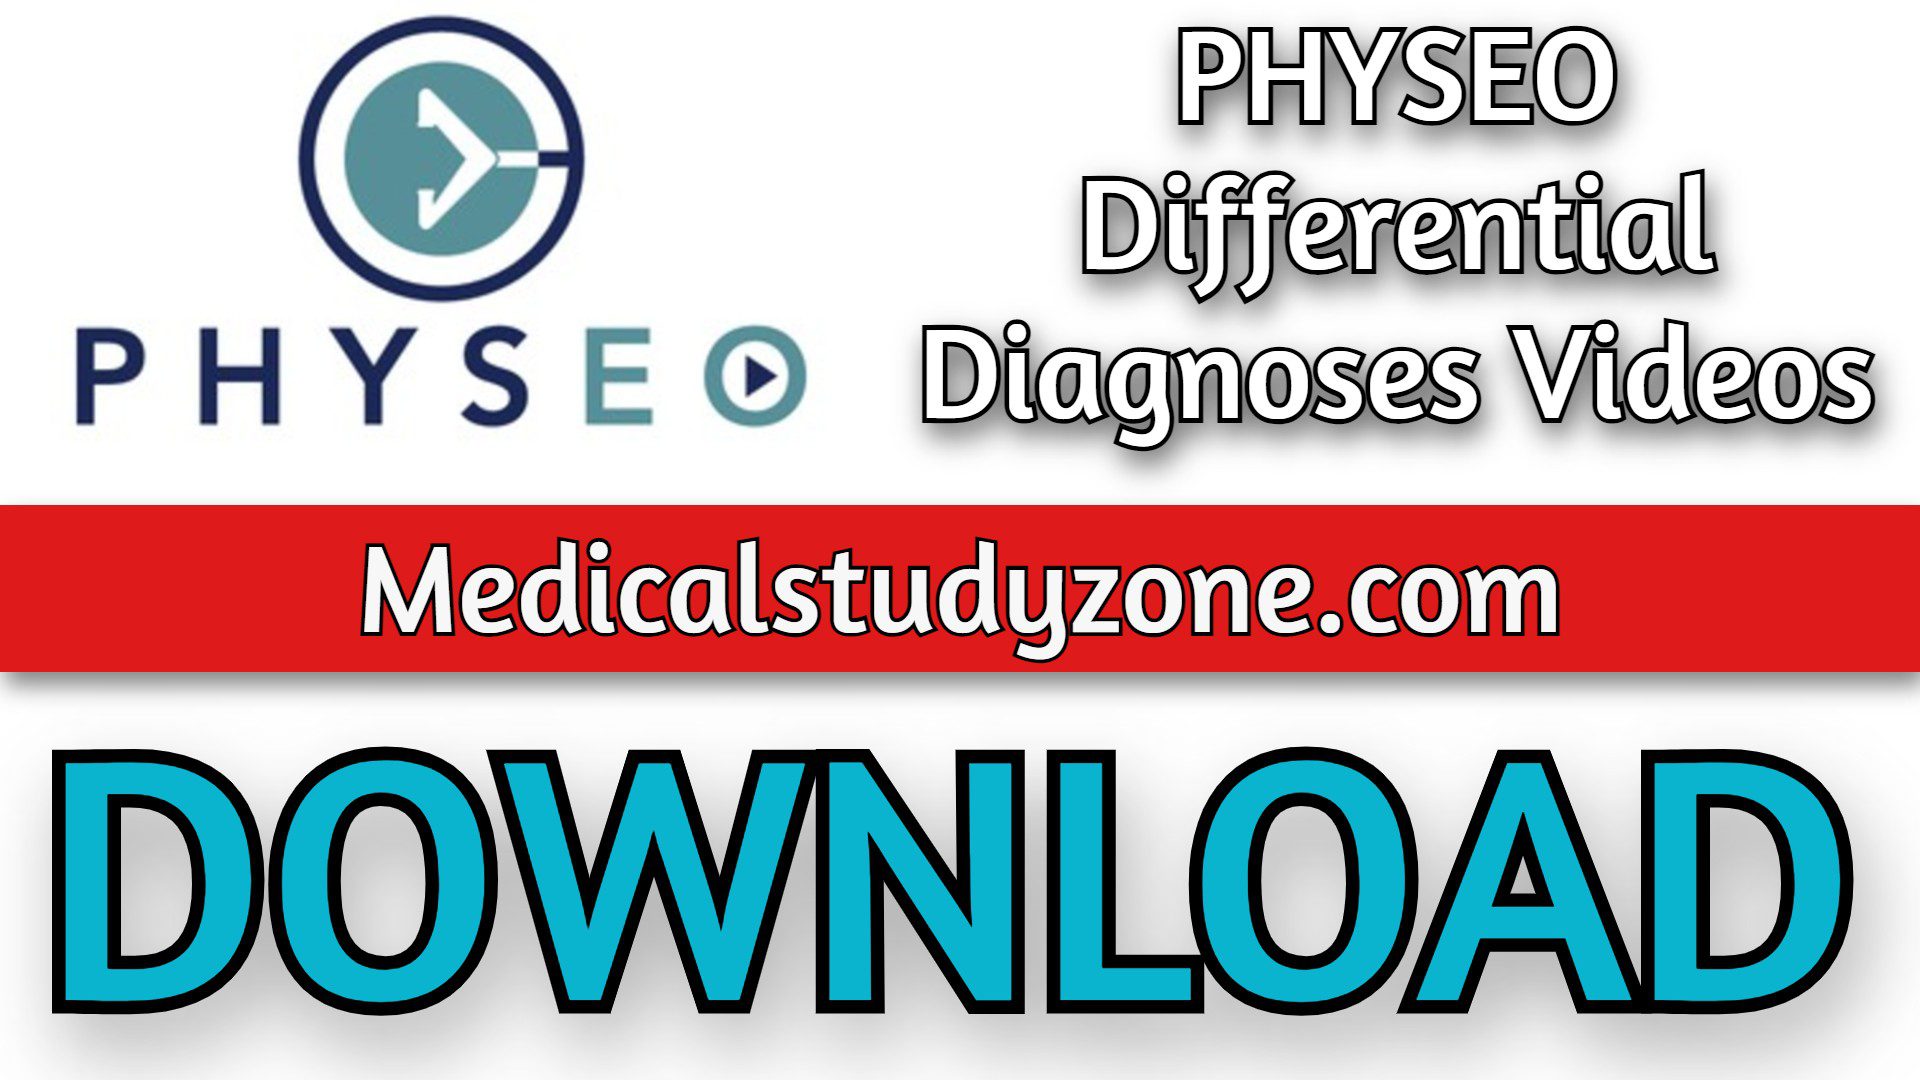 PHYSEO Differential Diagnoses Videos 2023 Free Download